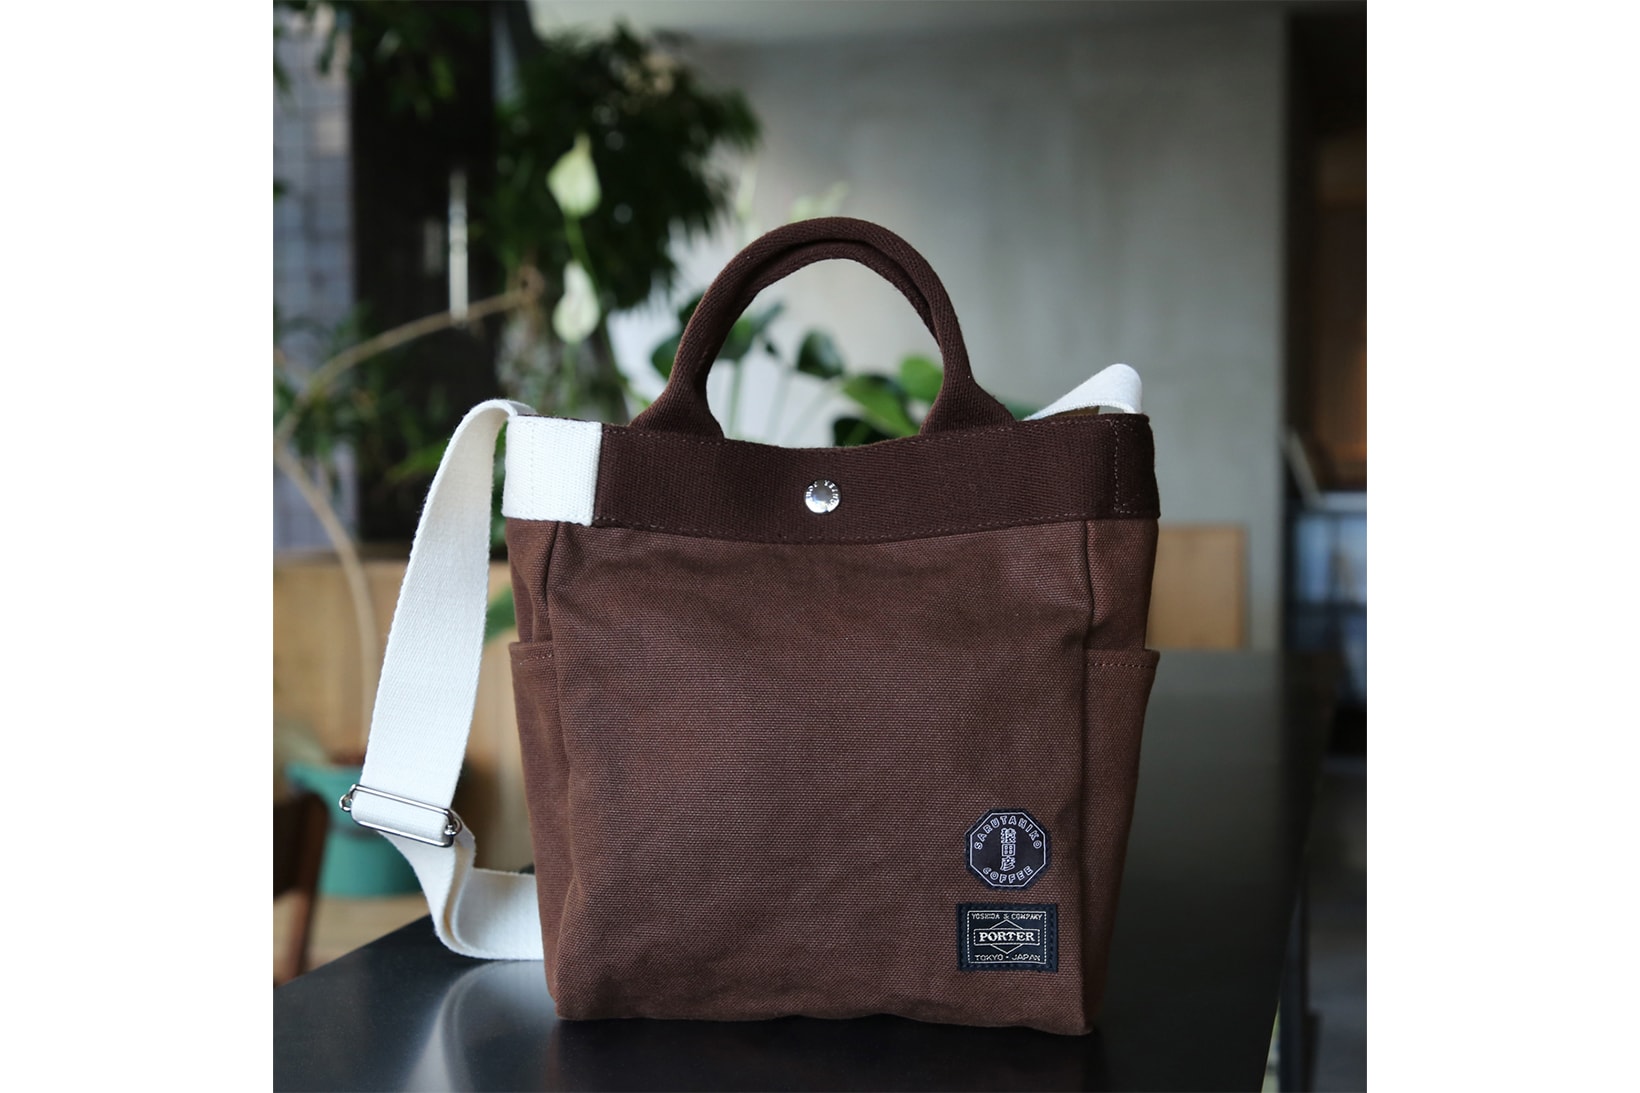 Sarutahiko Coffee Porter Coffee Dyed Bags Brown Tote 2017 December Release Date Info Collaboration Tokyo Japan Head Espresso tote 2-way